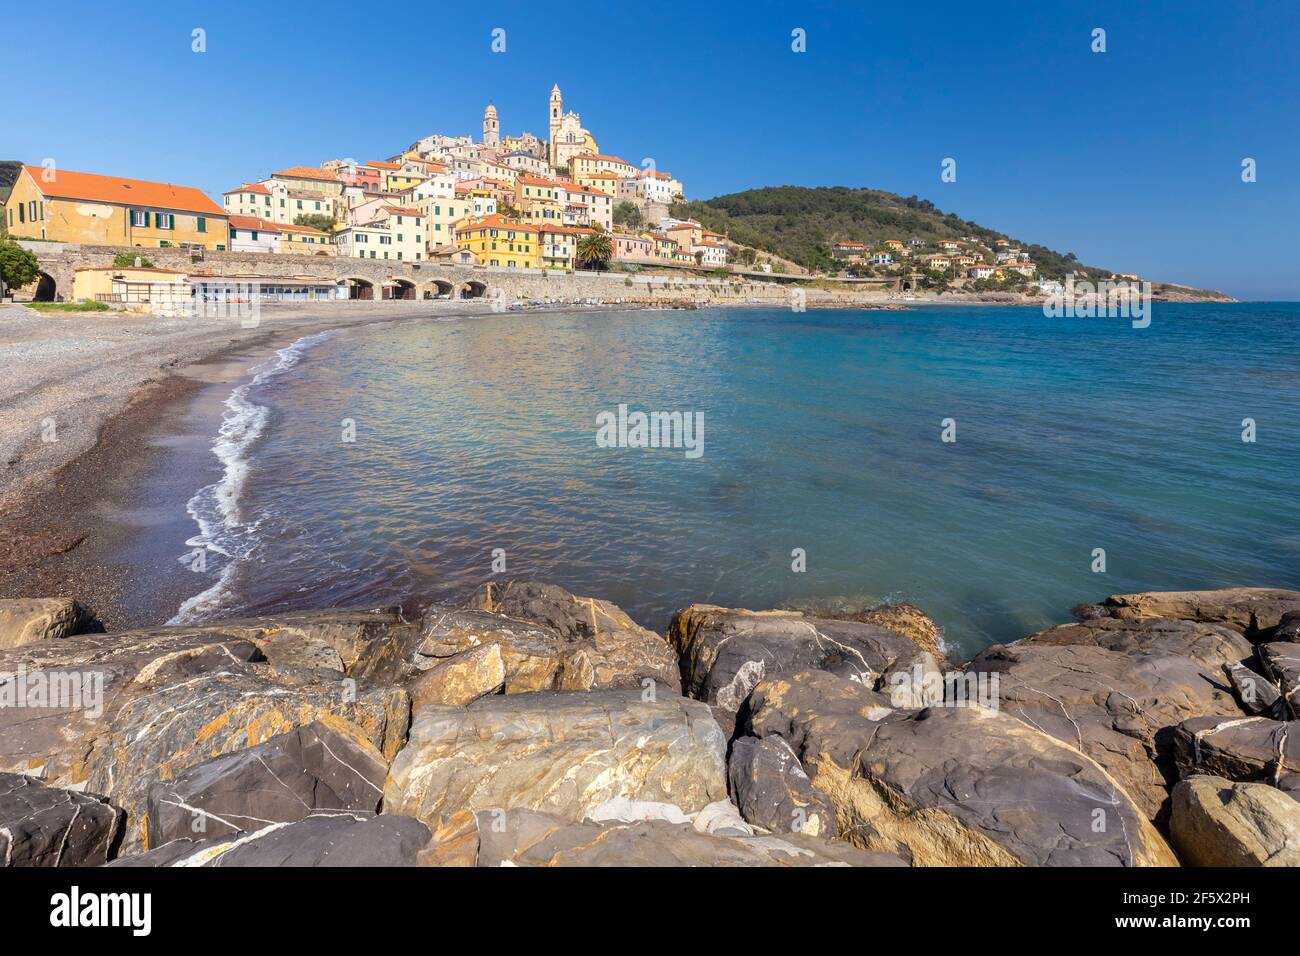 View of the colorful town and beach of Cervo. Cervo, Imperia province, Ponente Riviera, Liguria, Italy, Europe. Stock Photo